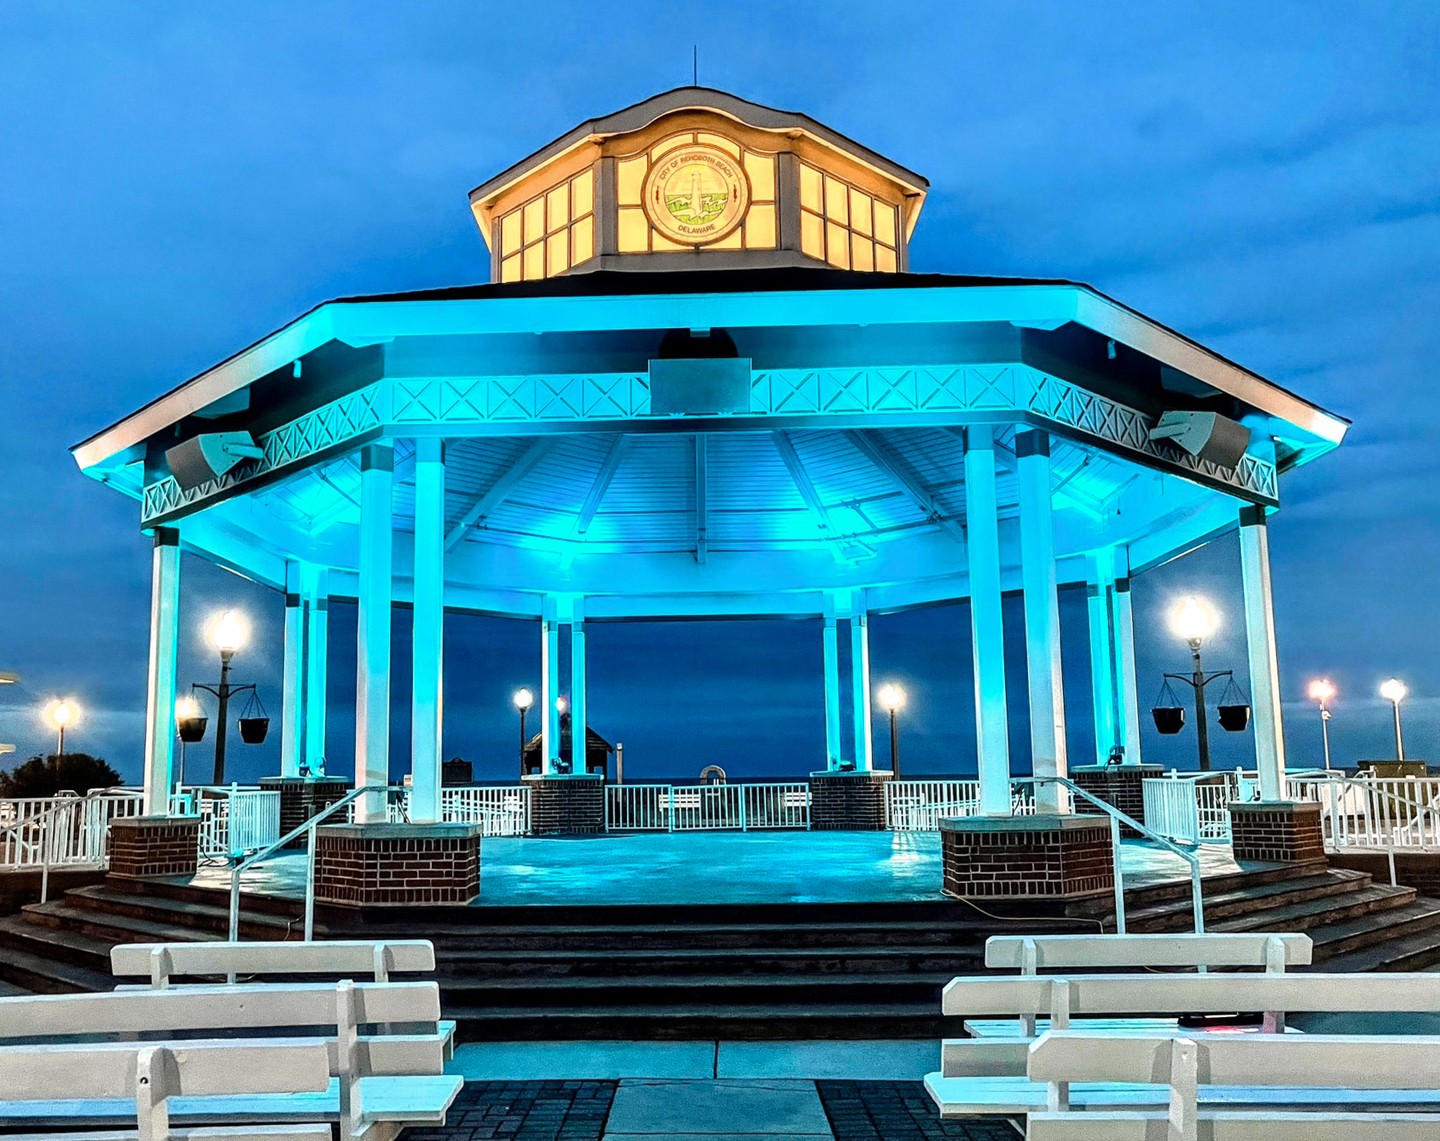 The @cityofrehobothbeachde and the @rehobothbandstand are proud to show their support during the @LUNGFORCE’s Turquoise Takeover, supporting those living with lung cancer and raising the funds needed to support education, advocacy, and research.

Learn how you can join the movement at LUNGFORCE.org